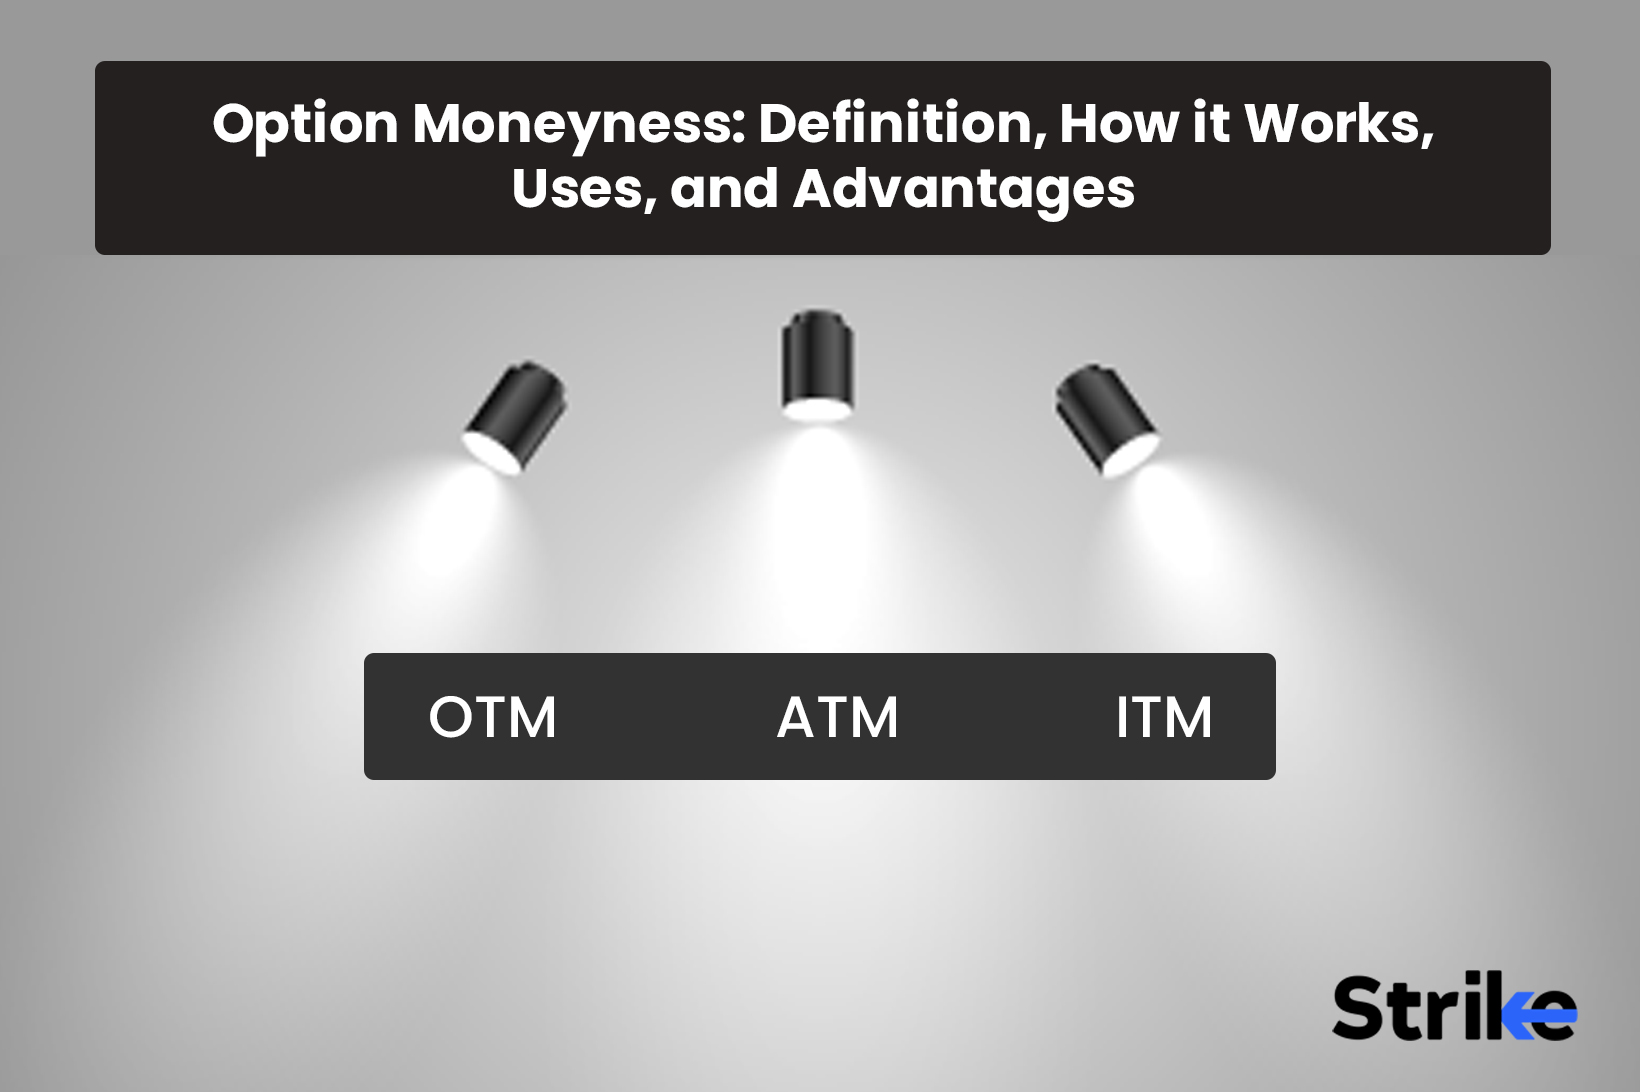 Option Moneyness: Definition, How it Works, Uses, and Advantages